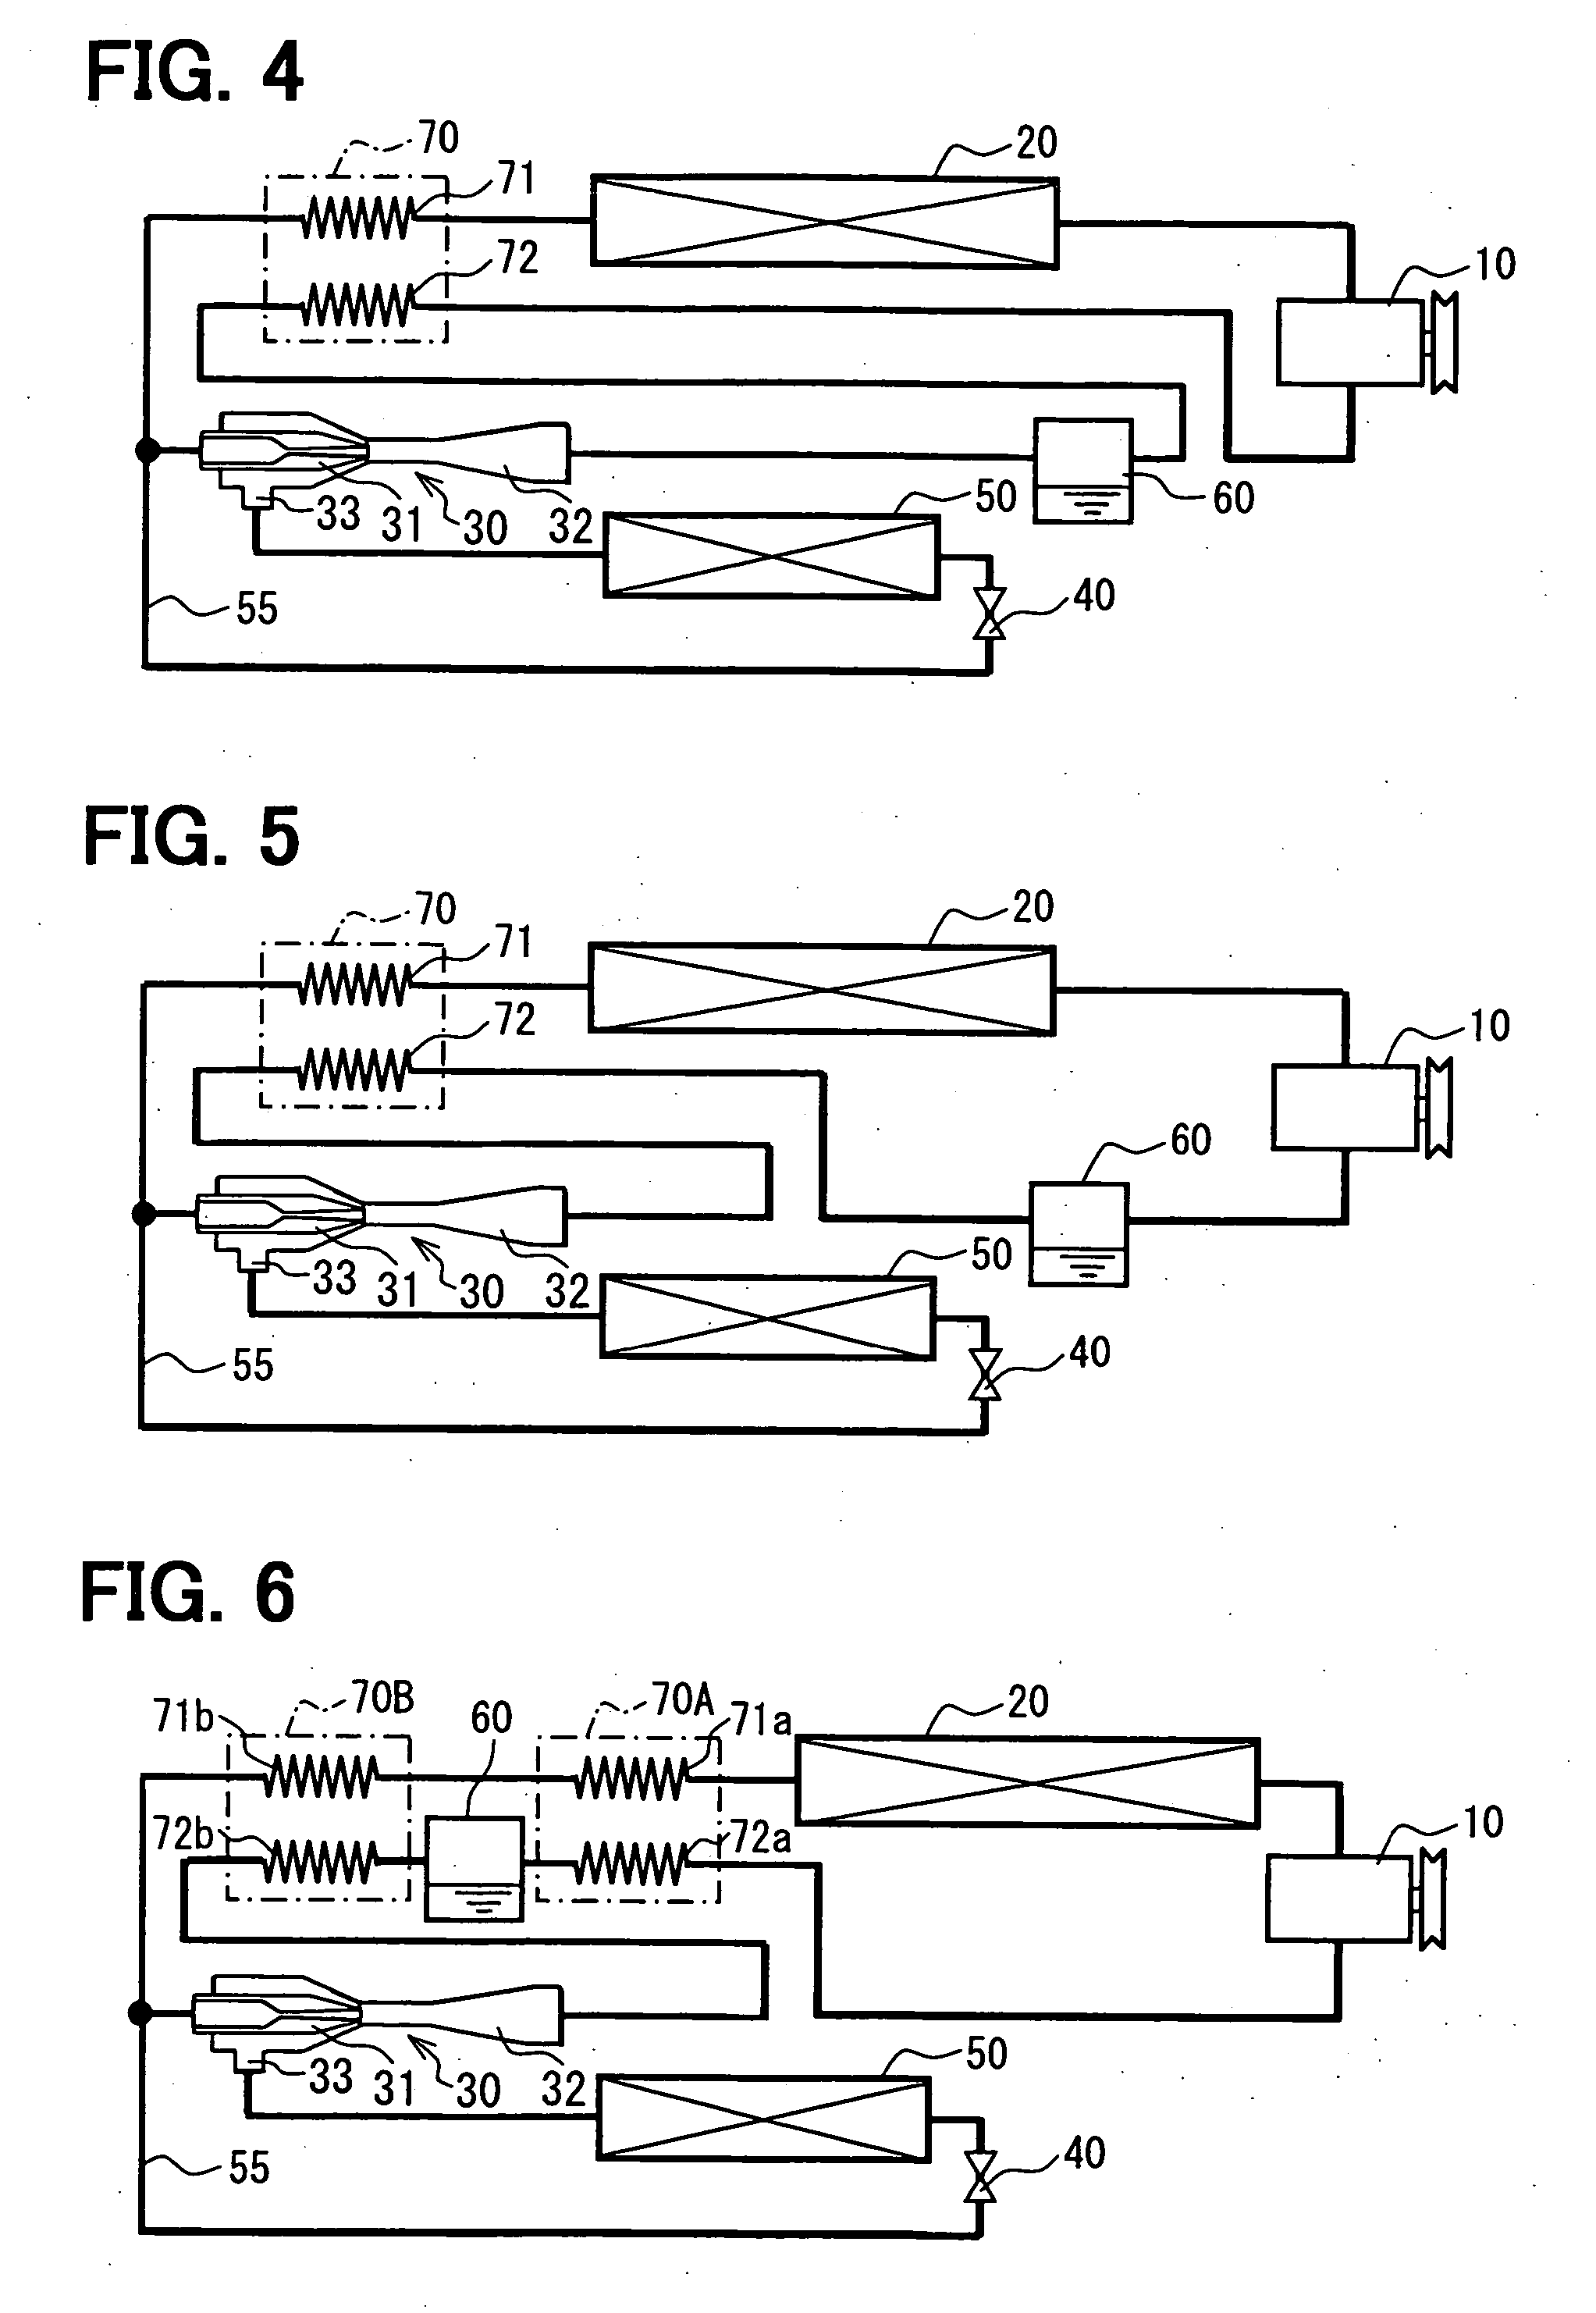 Ejector and ejector cycle device